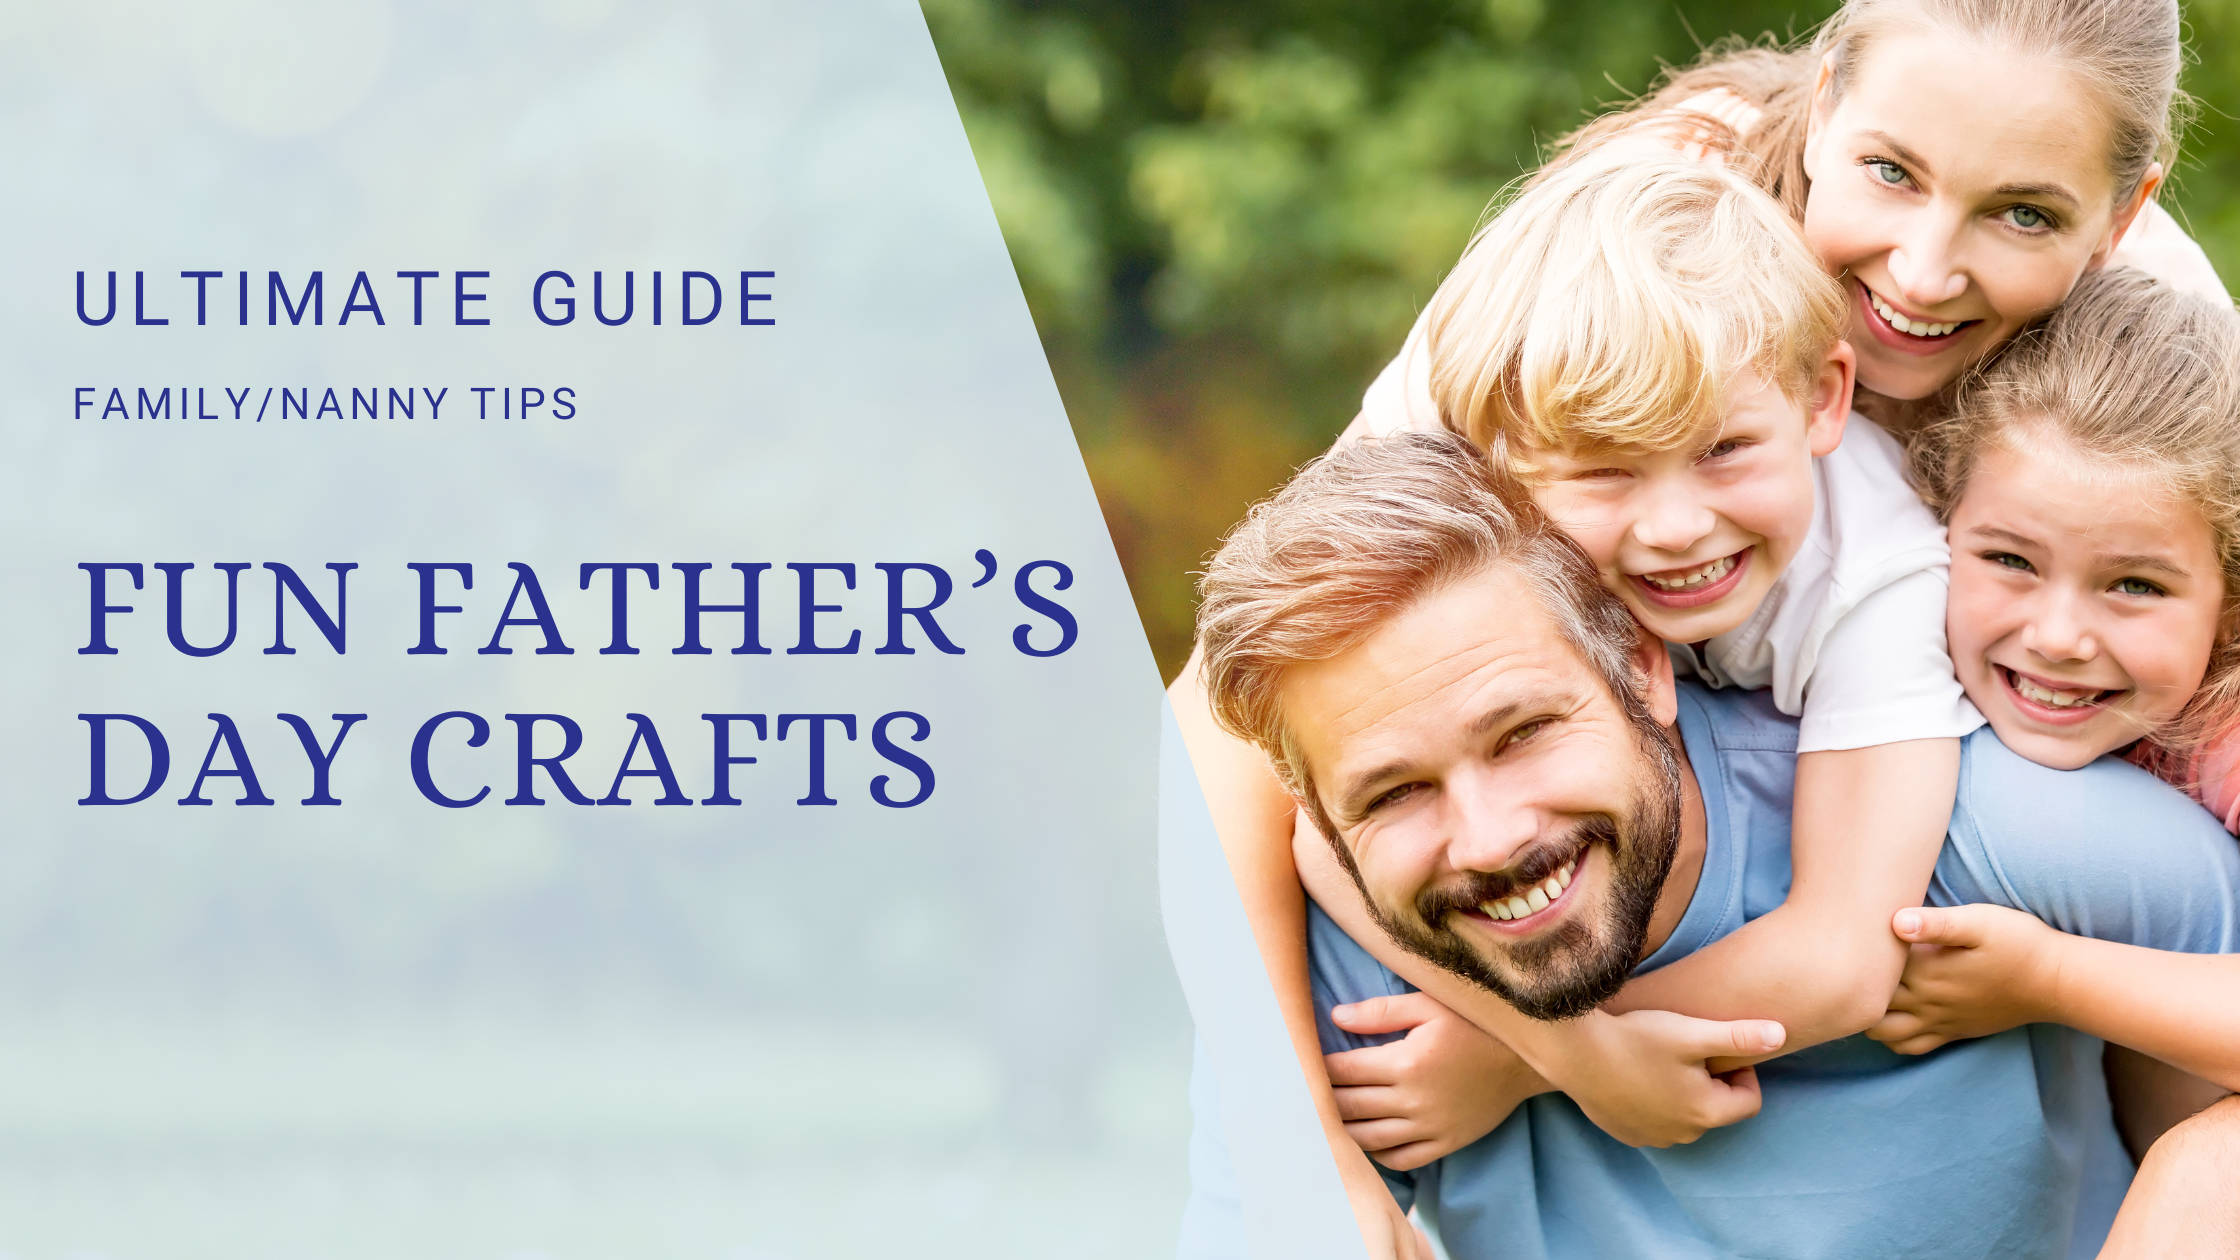 Our blog covers fun Father's Day kids crafts your nanny can do with the kids.